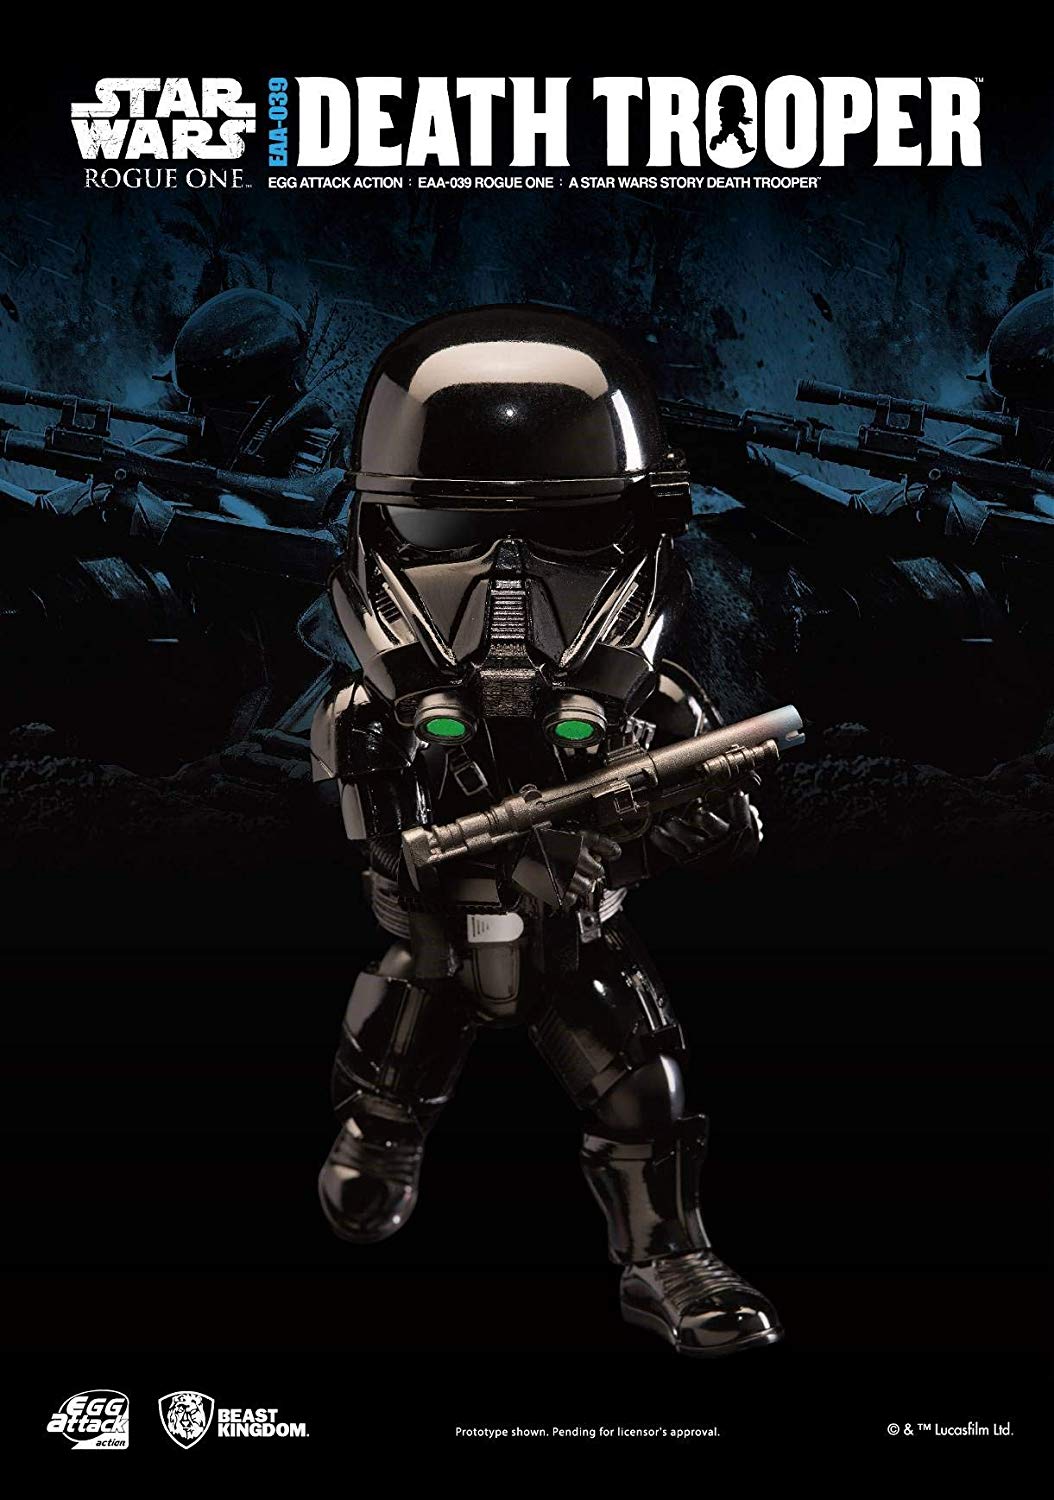 Beast Kingdom EAA-039 Star Wars Rogue One: Death Trooper Egg Attack Action Figure